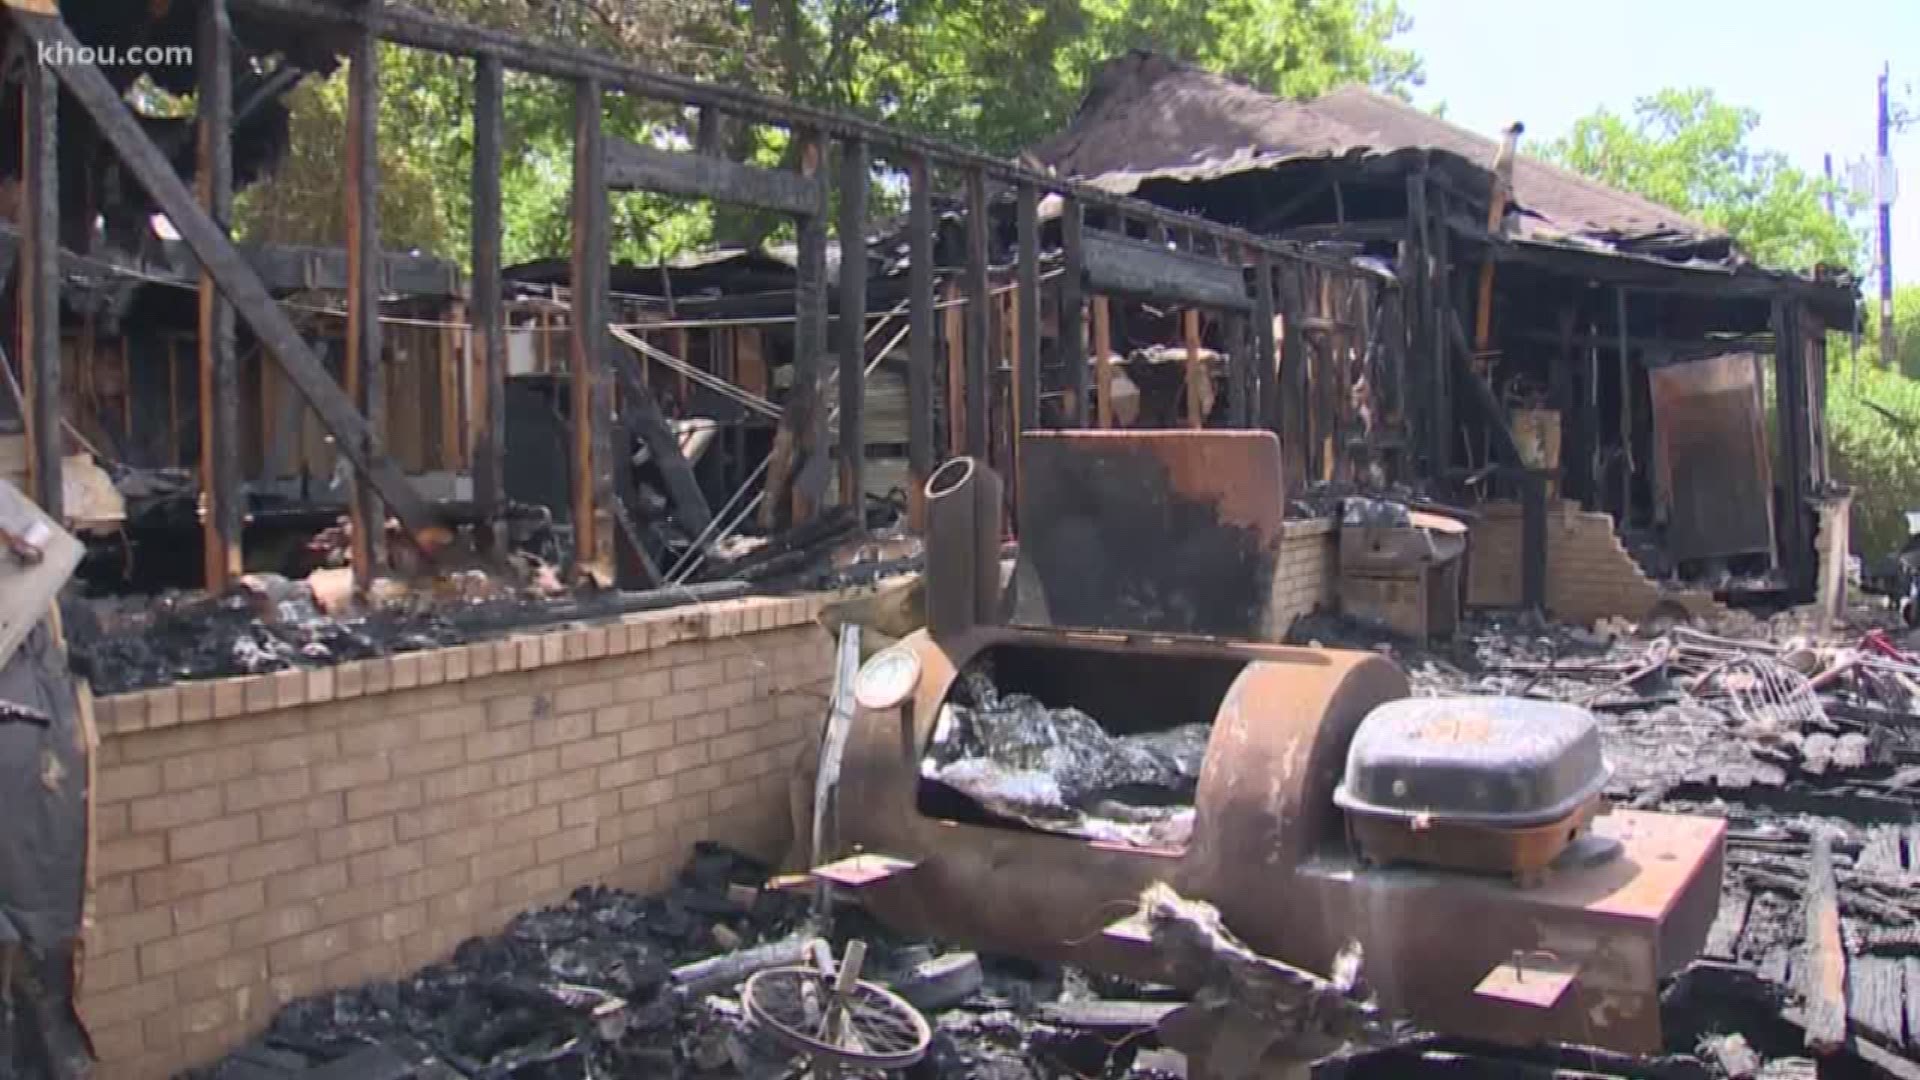 A family is getting much support from total strangers after their house burned down.